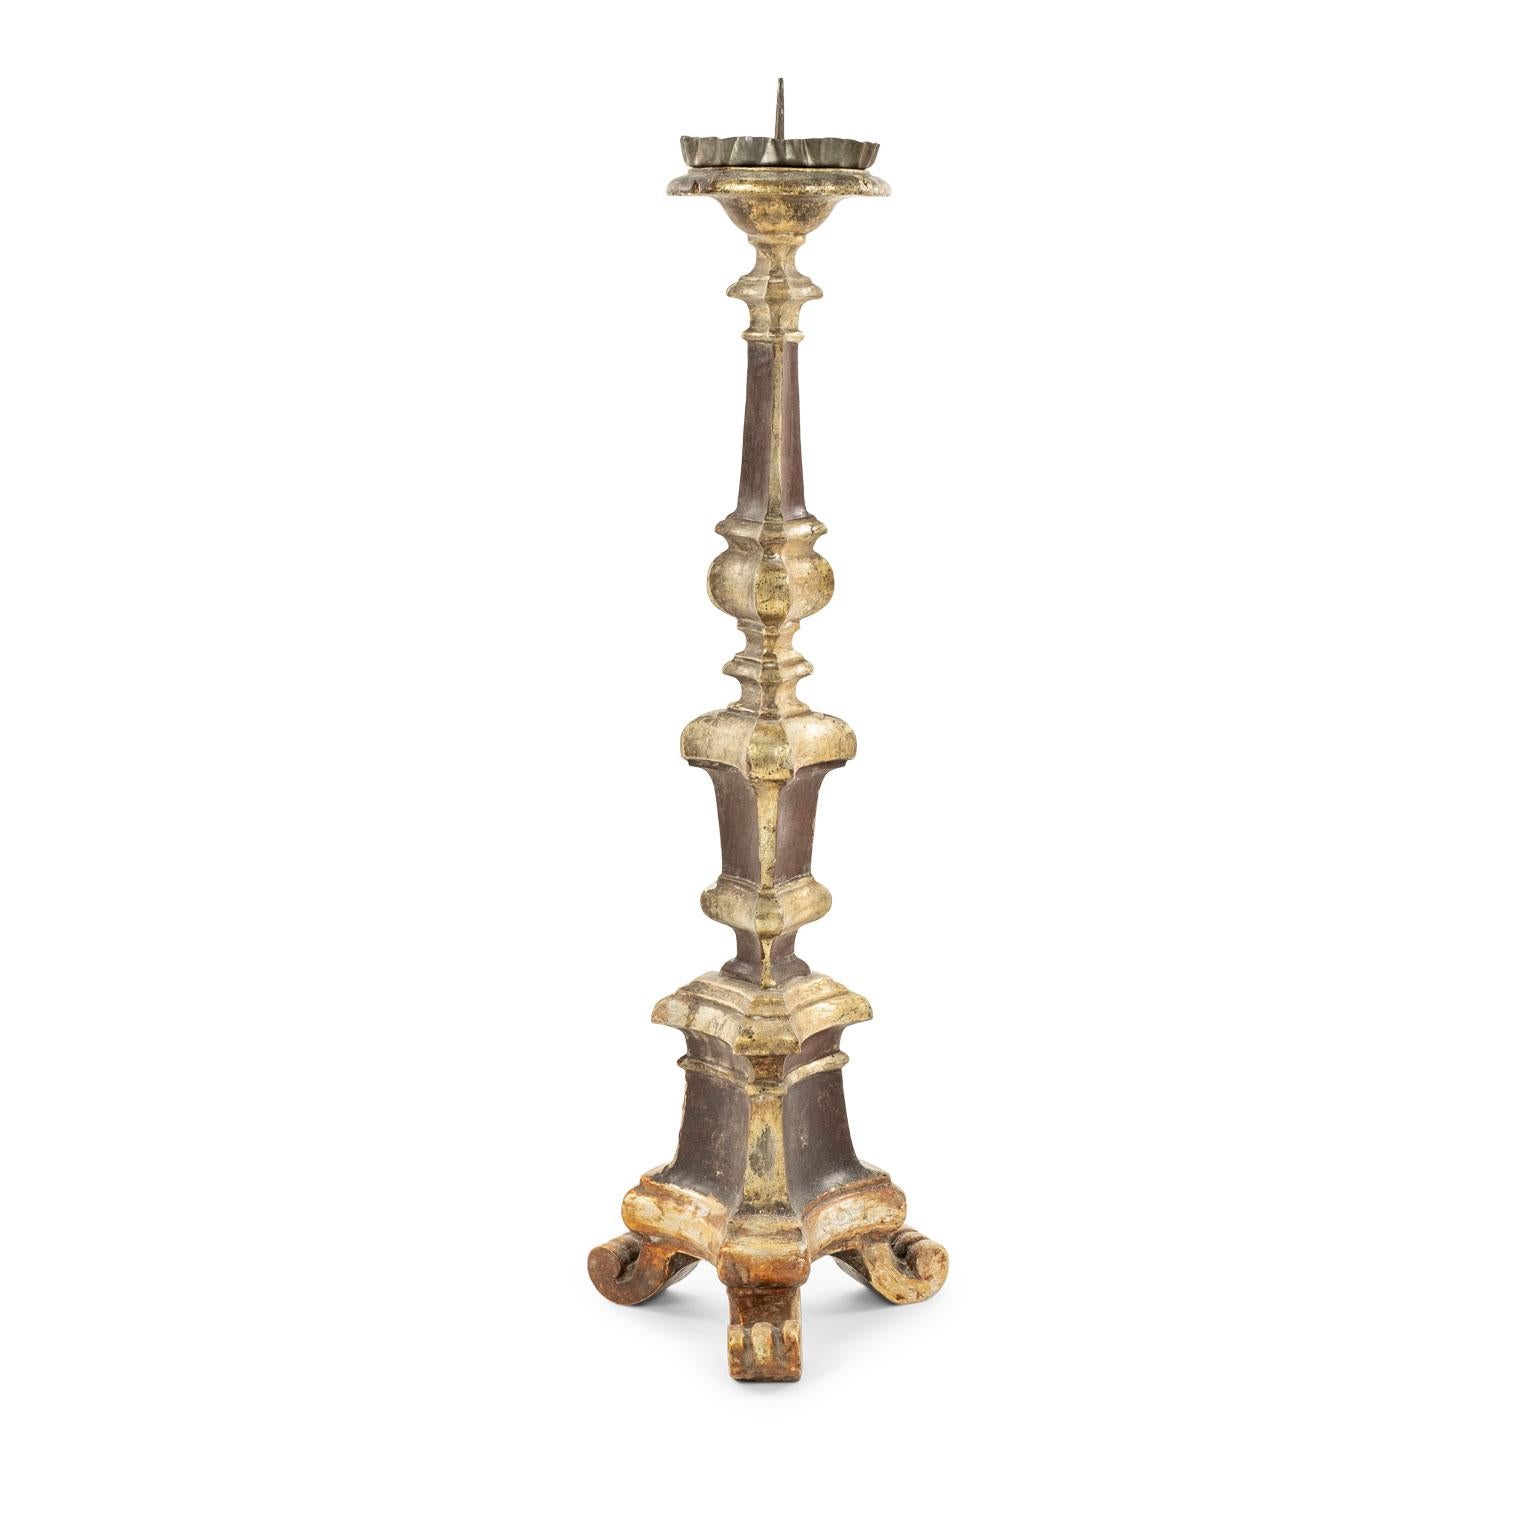 19th century hand-carved giltwood candlestick from France.